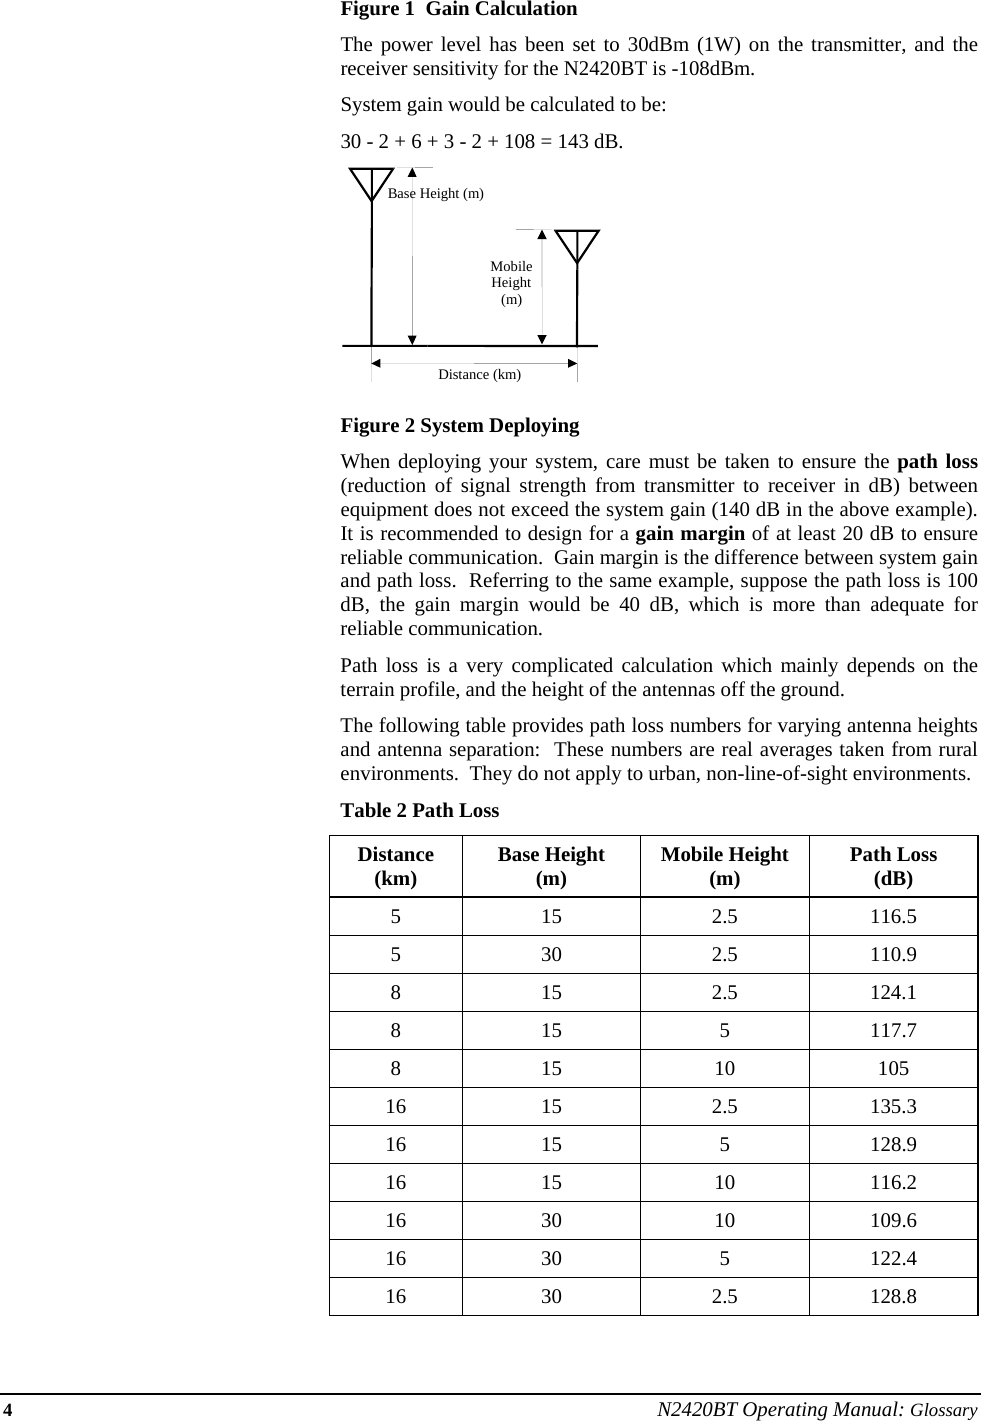 4 N2420BT Operating Manual: Glossary Figure 1  Gain Calculation The power level has been set to 30dBm (1W) on the transmitter, and the receiver sensitivity for the N2420BT is -108dBm.   System gain would be calculated to be: 30 - 2 + 6 + 3 - 2 + 108 = 143 dB.  Figure 2 System Deploying When deploying your system, care must be taken to ensure the path loss (reduction of signal strength from transmitter to receiver in dB) between equipment does not exceed the system gain (140 dB in the above example).  It is recommended to design for a gain margin of at least 20 dB to ensure reliable communication.  Gain margin is the difference between system gain and path loss.  Referring to the same example, suppose the path loss is 100 dB, the gain margin would be 40 dB, which is more than adequate for reliable communication. Path loss is a very complicated calculation which mainly depends on the terrain profile, and the height of the antennas off the ground.  The following table provides path loss numbers for varying antenna heights and antenna separation:  These numbers are real averages taken from rural environments.  They do not apply to urban, non-line-of-sight environments. Table 2 Path Loss Distance (km)  Base Height (m)  Mobile Height (m)  Path Loss (dB) 5 15  2.5 116.5 5 30  2.5 110.9 8 15  2.5 124.1 8 15  5 117.7 8 15  10 105 16 15  2.5 135.3 16 15  5  128.9 16 15  10 116.2 16 30  10 109.6 16 30  5  122.4 16 30  2.5 128.8  Base Height (m)MobileHeight(m)Distance (km)